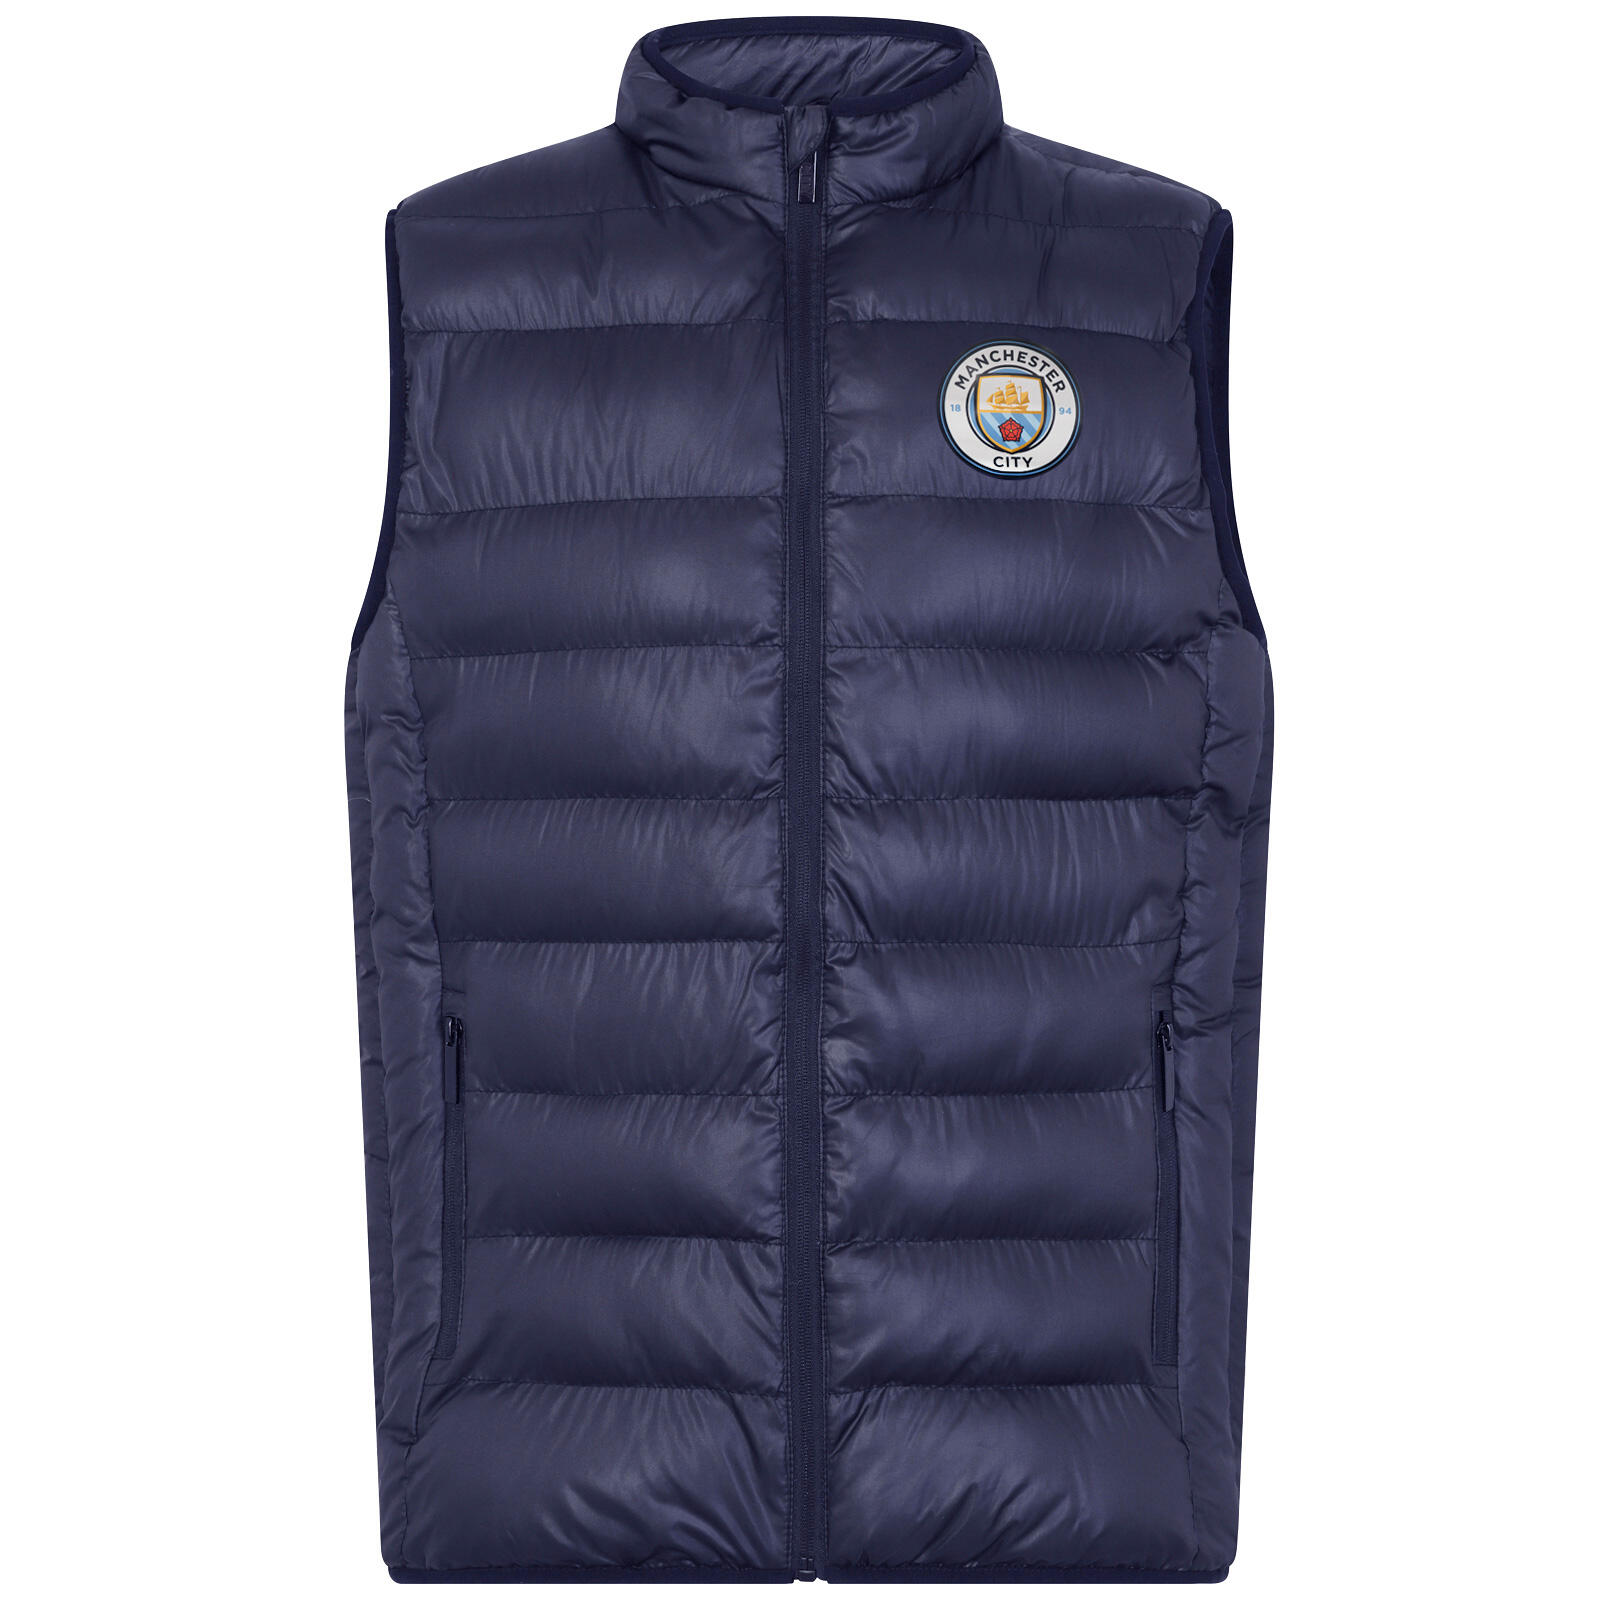 MANCHESTER CITY Manchester City Boys Gilet Jacket Body Warmer Padded Kids OFFICIAL Gift